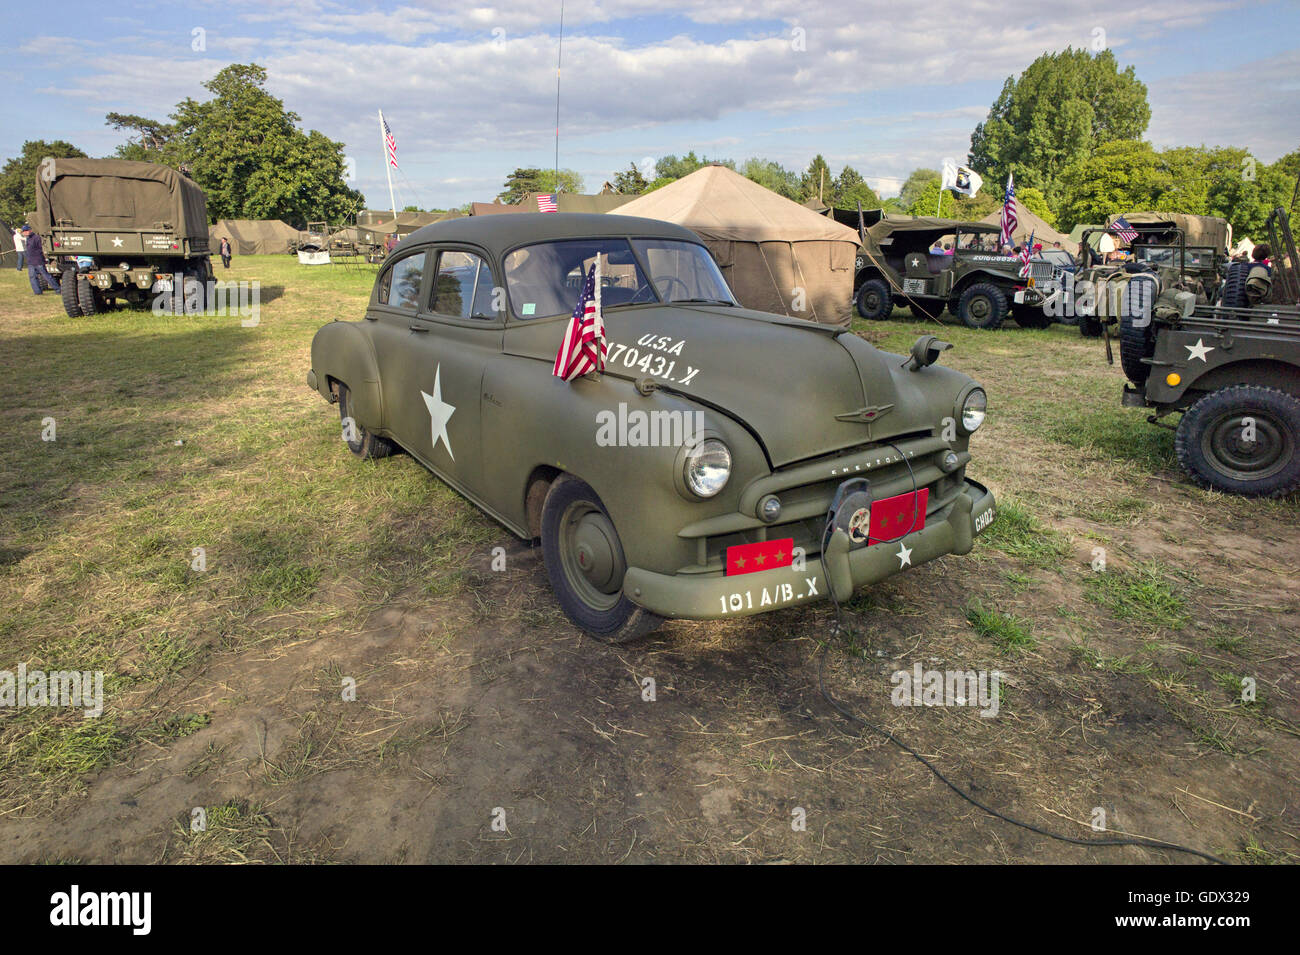 Oldtimer Chevrolet at the D-Day reenactment at Sainte Mere Eglise in France, 2014 Stock Photo